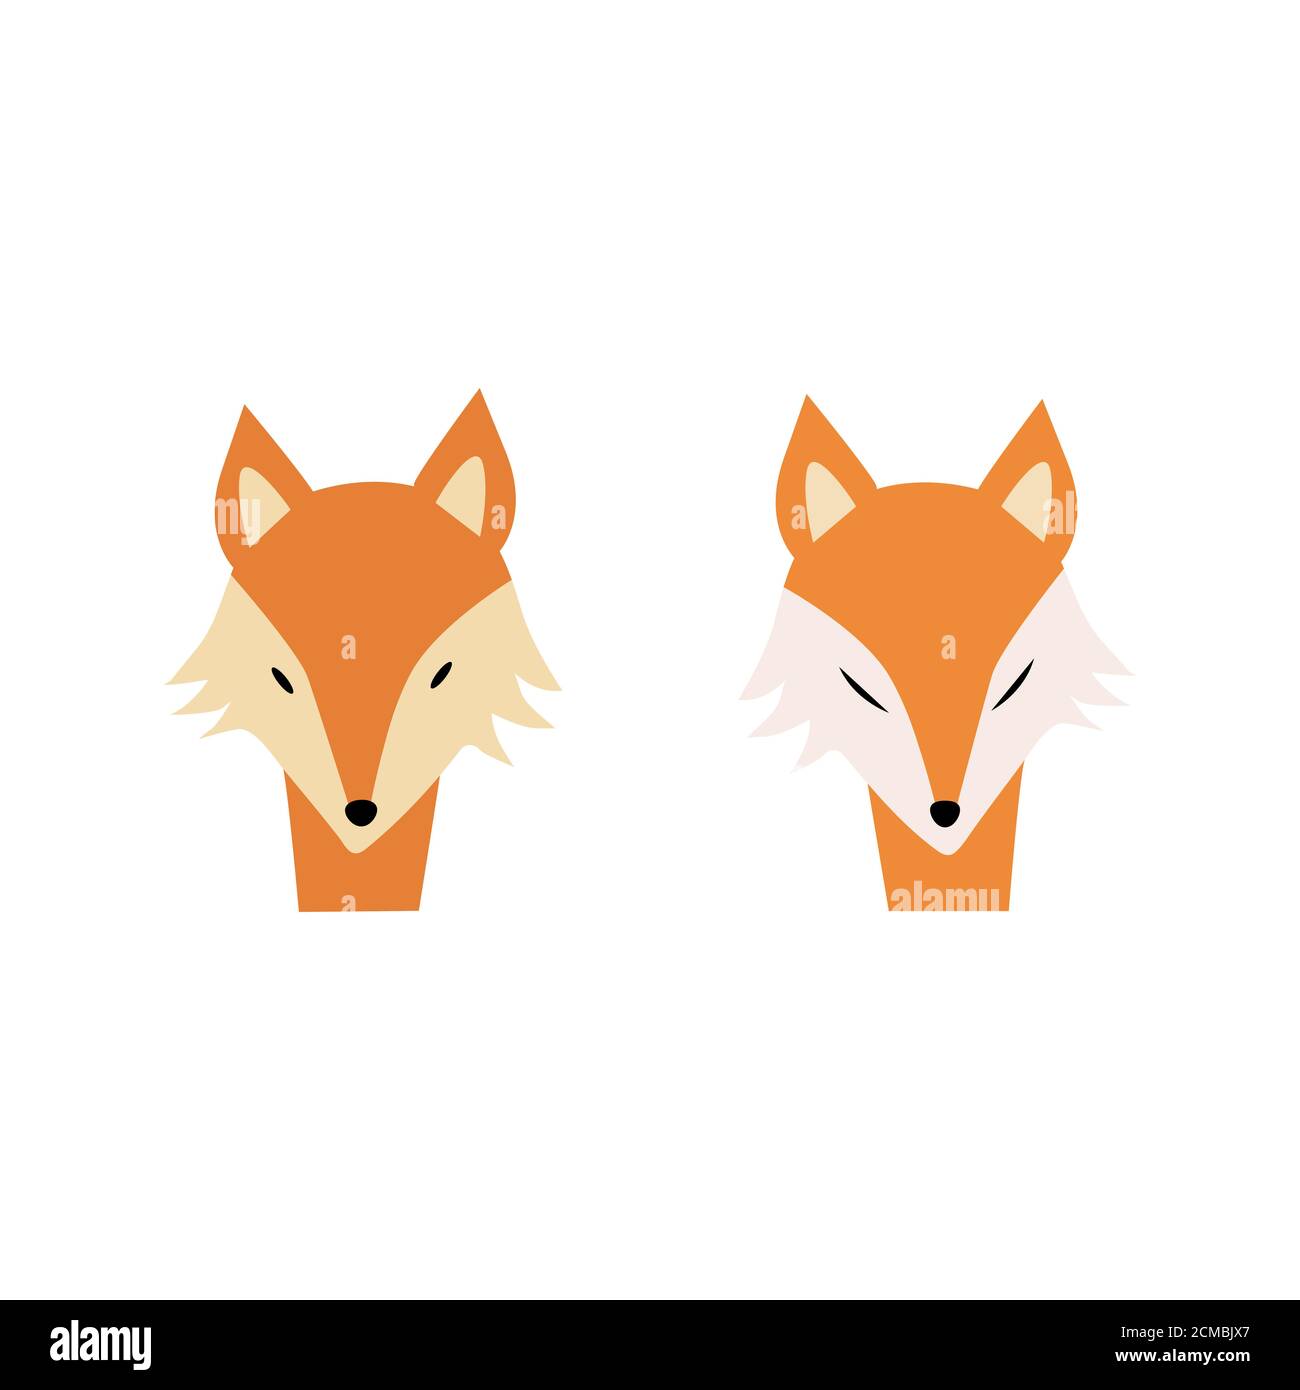 Cute cartoon set of foxes. Red fox. Cartoon animal character design. Flat vector illustration isolated on a white background. Stock Photo